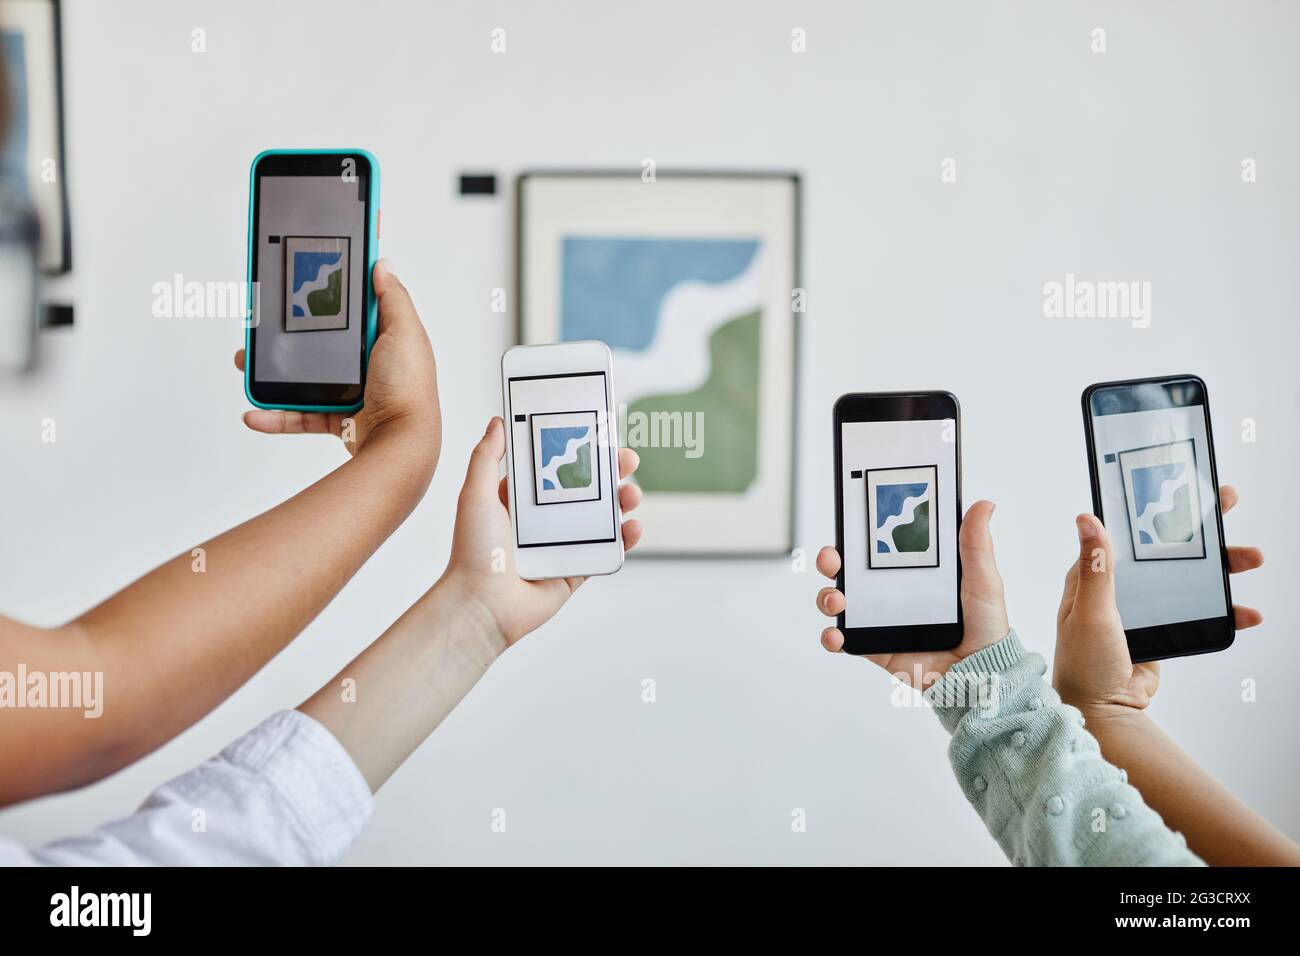 Background image of hands holding smartphones in modern art gallery and taking photos of paintings, digital world, copy space Stock Photo